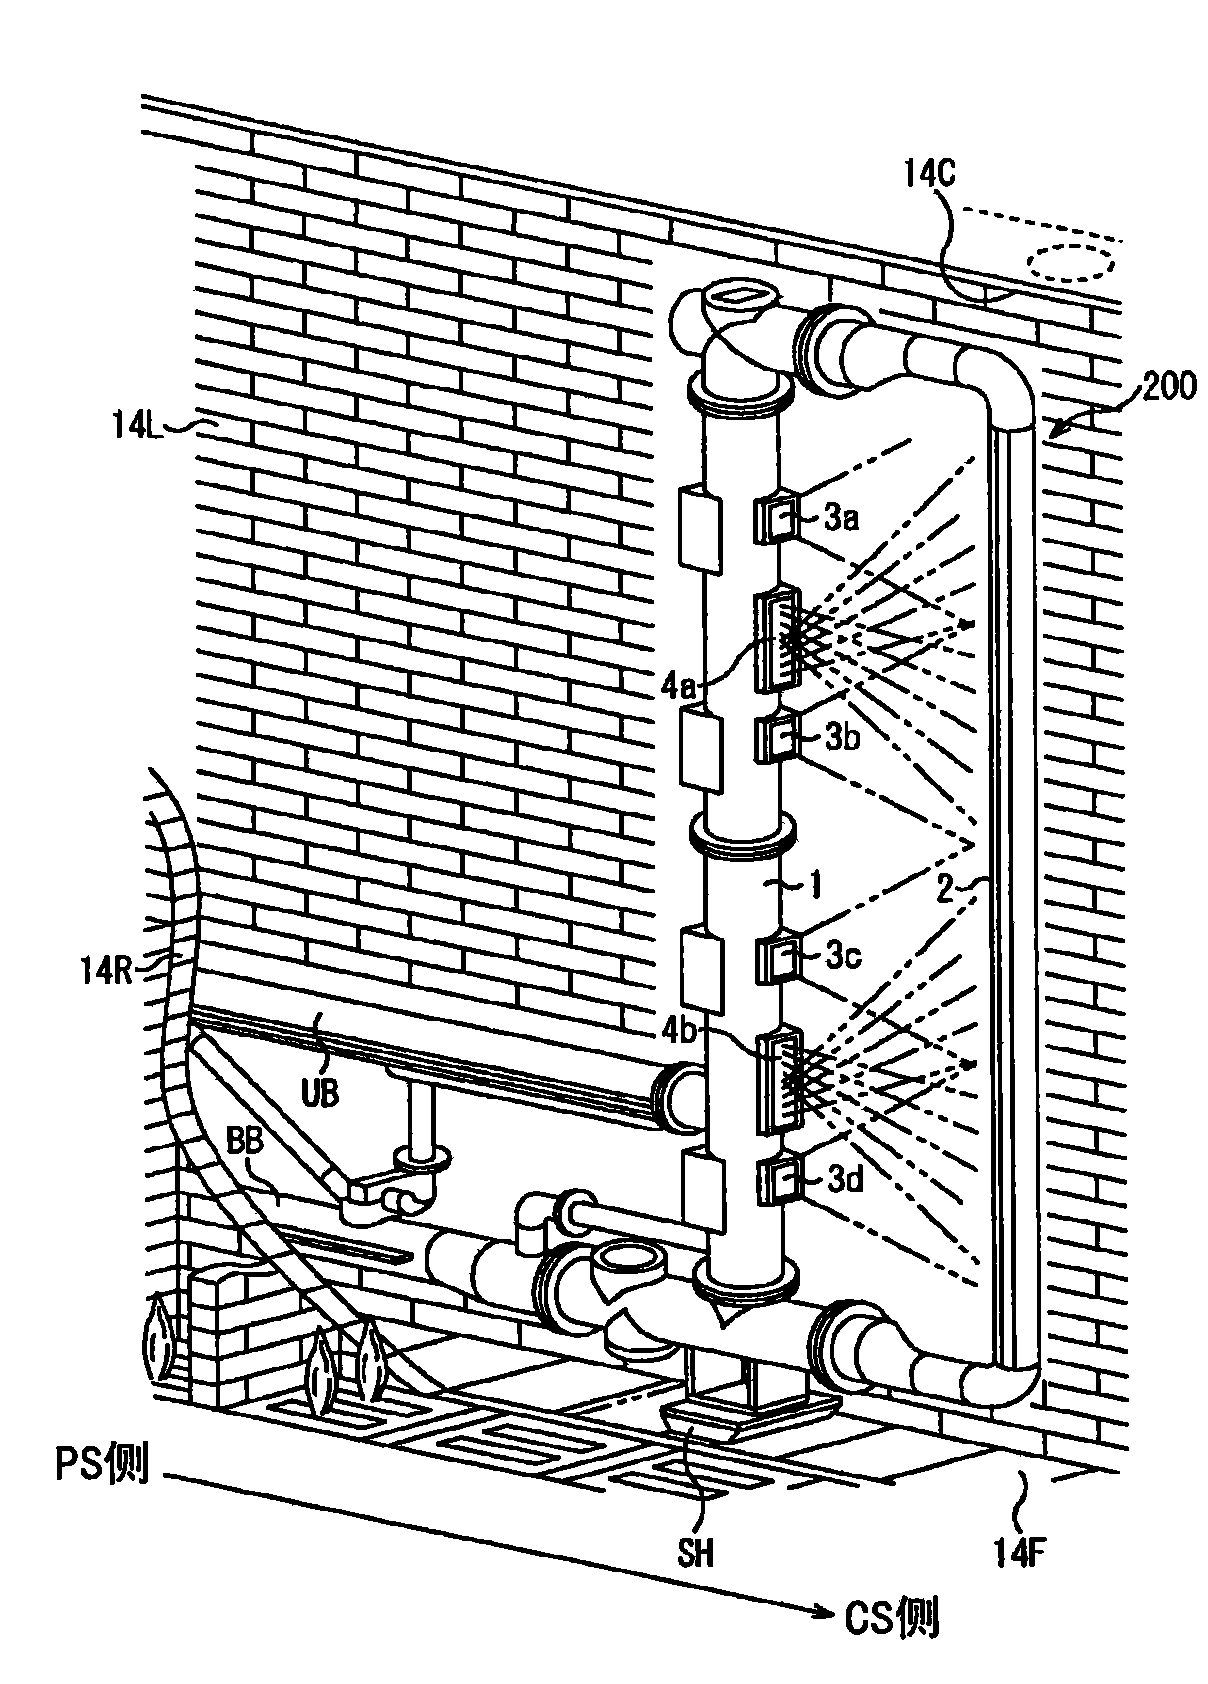 Coke-oven wall-surface evaluating apparatus, coke-oven wall-surface repair supporting apparatus, coke-oven wall-surface evaluating method, coke-oven wall-surface repair supporting method, and computer